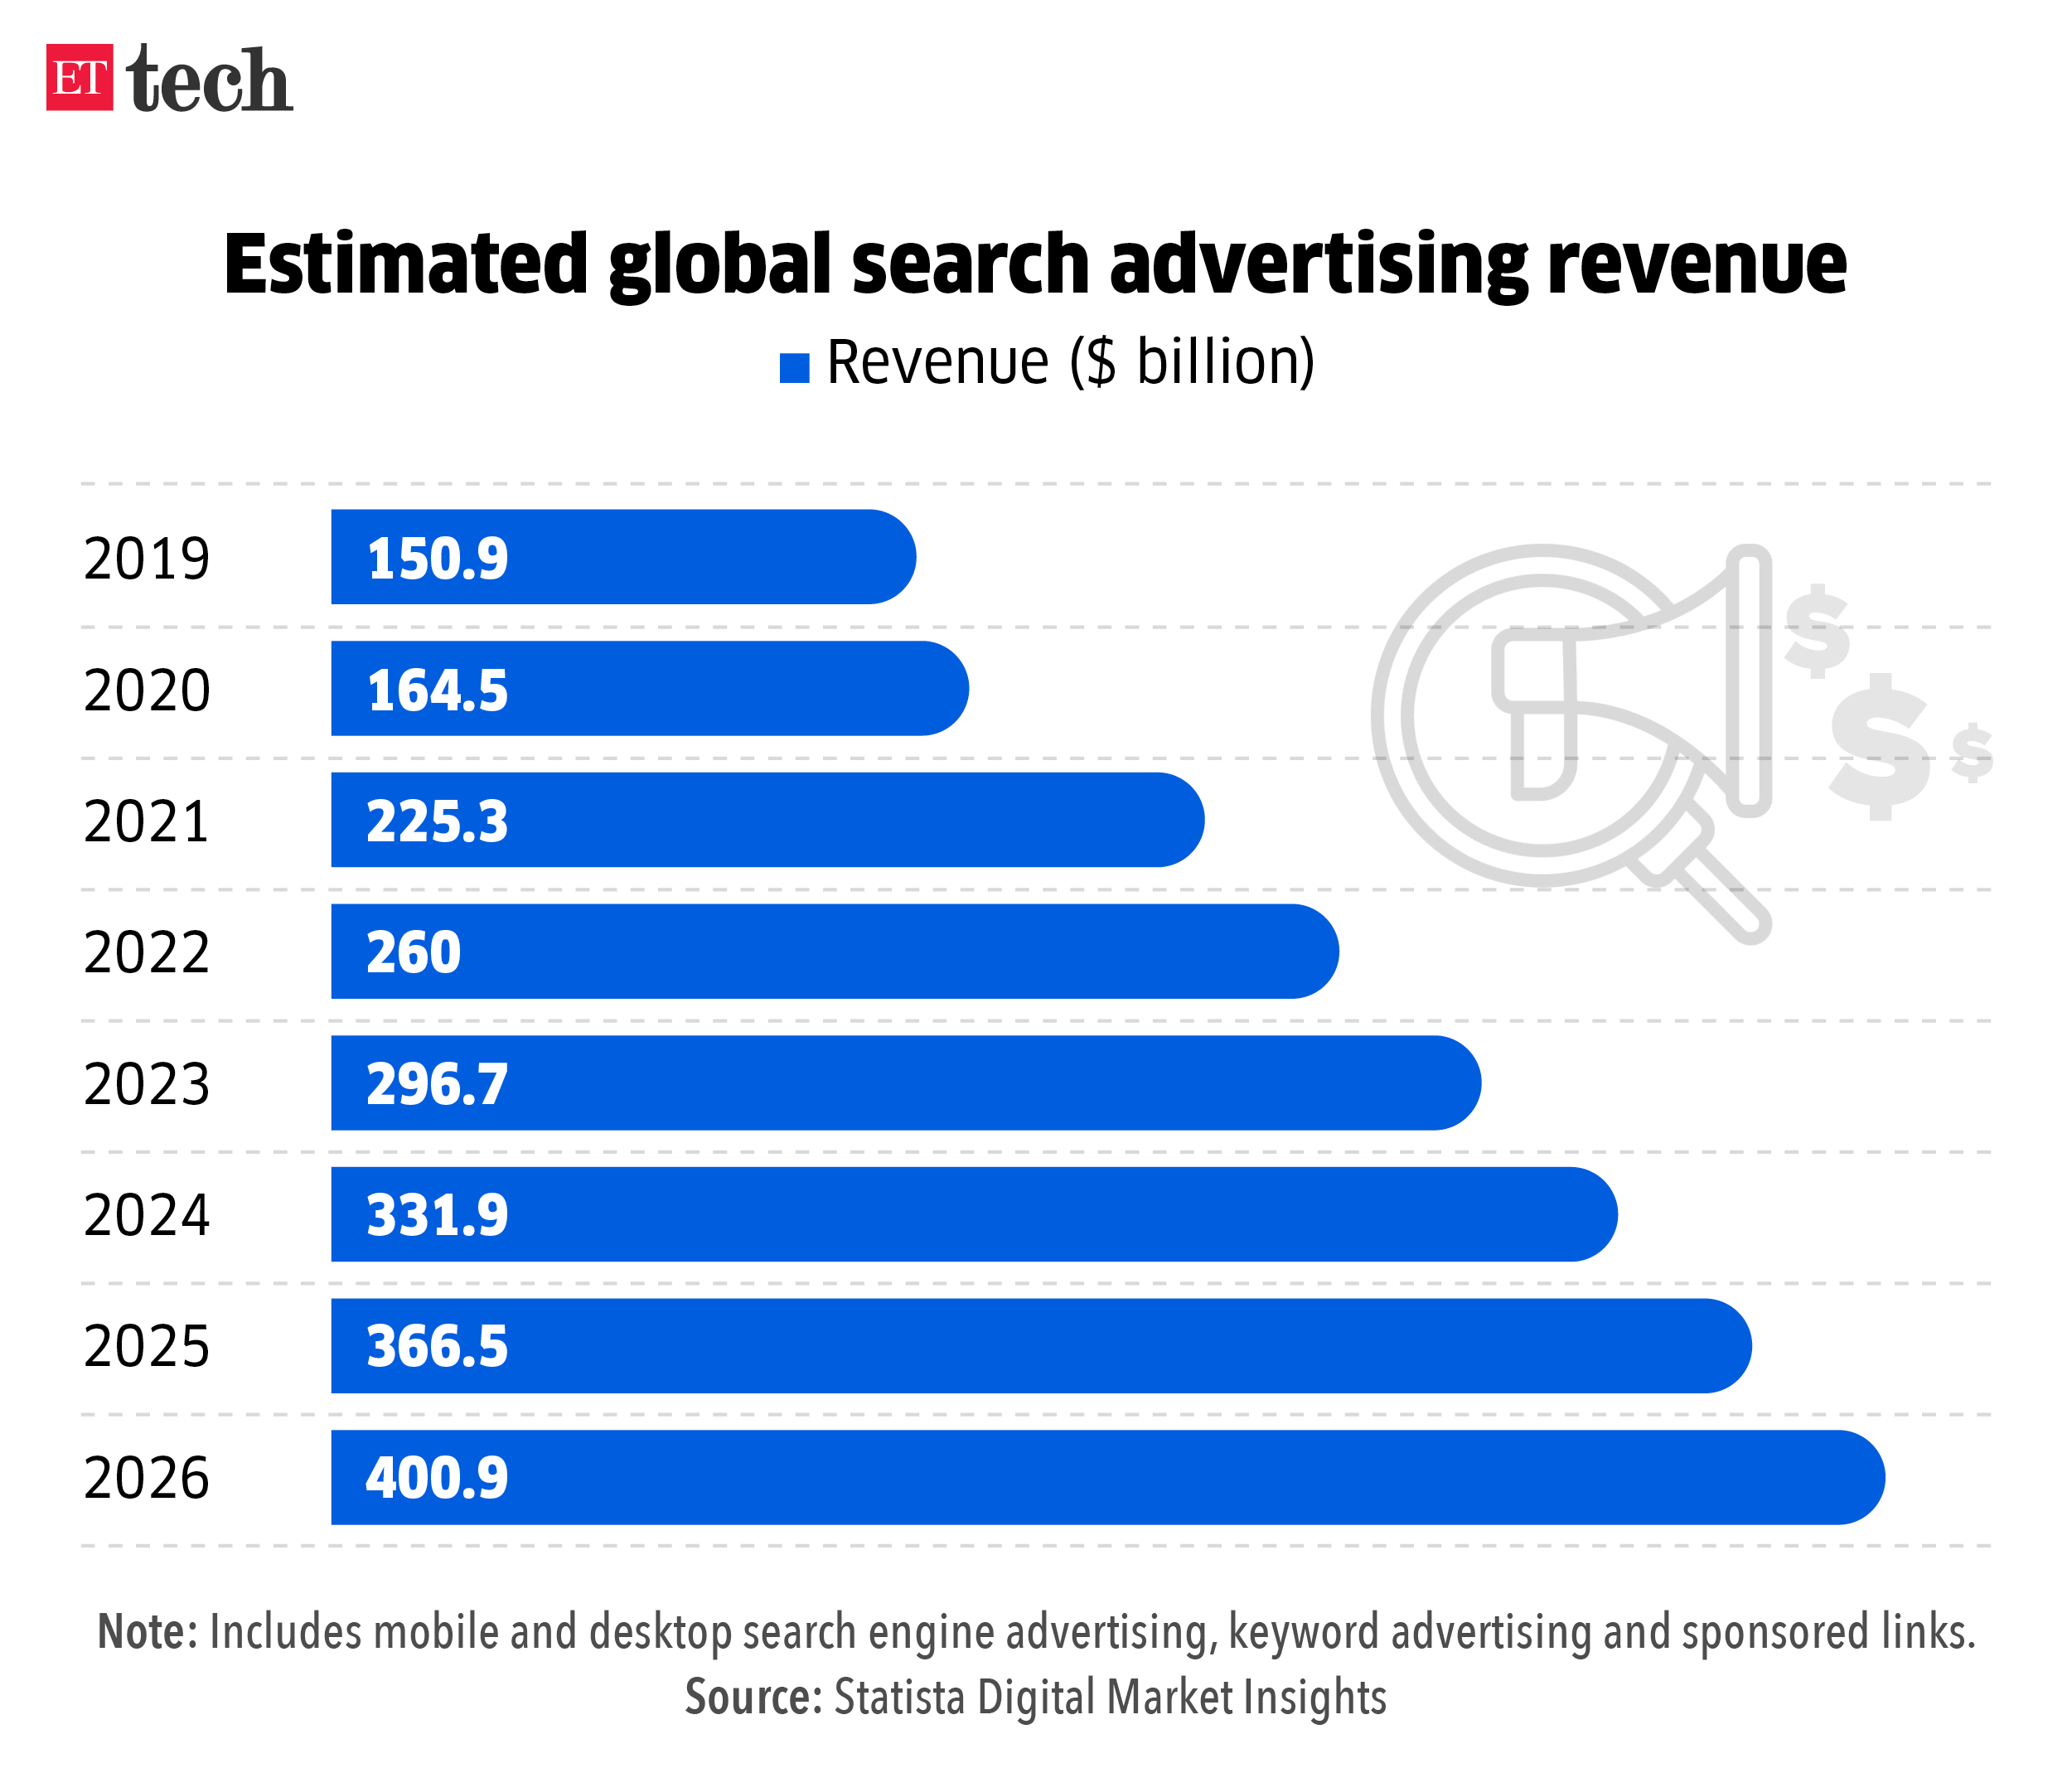 Estimated global search advertising revenue